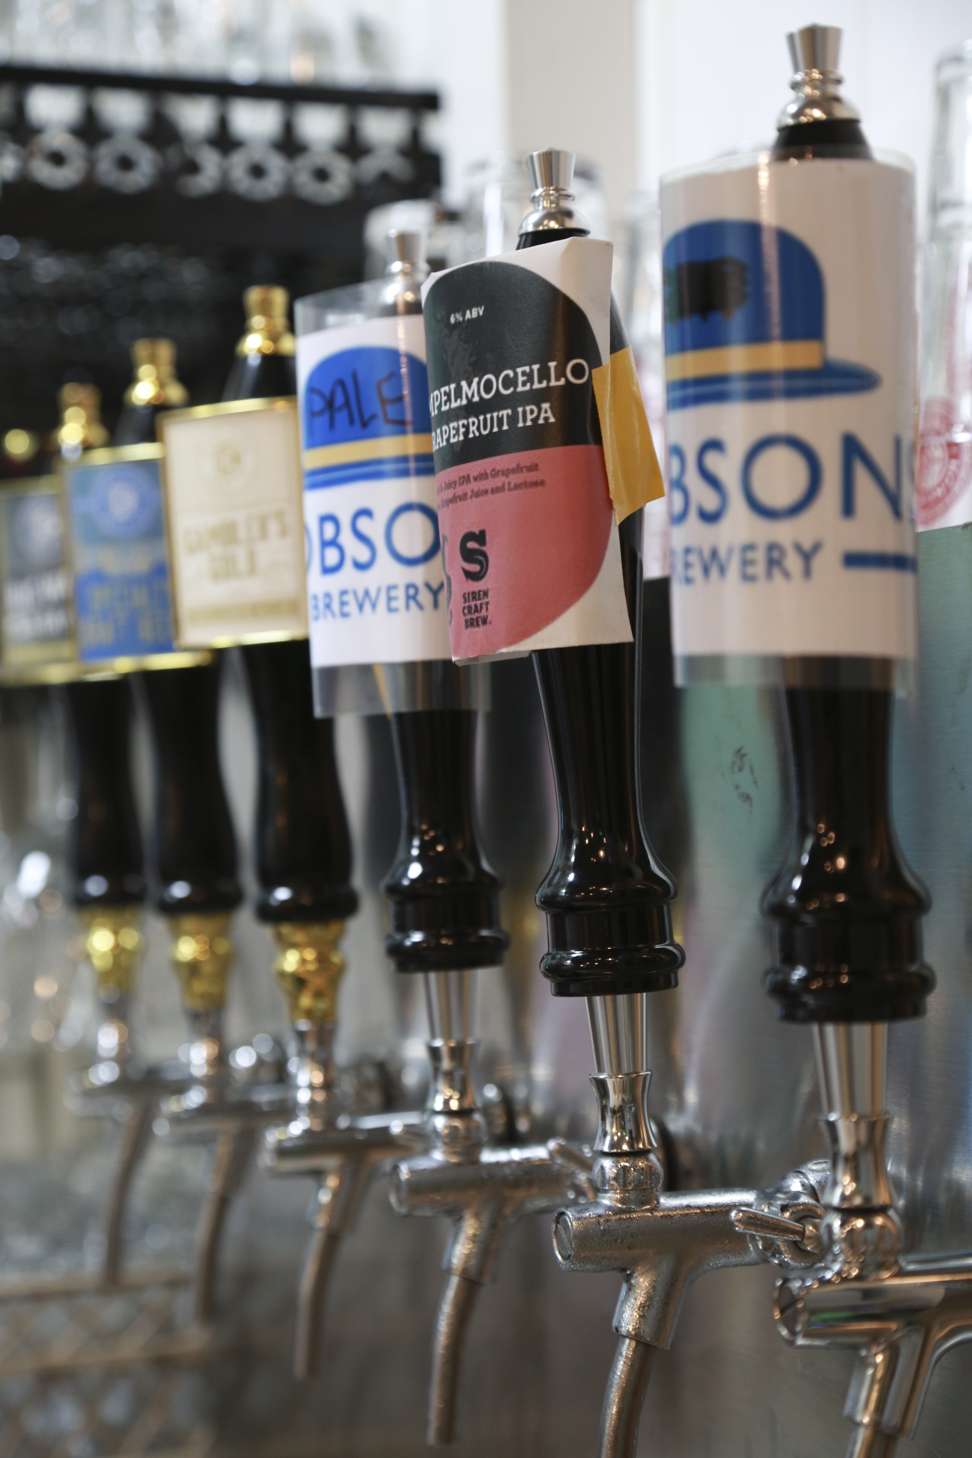 Choose from six draught beers at 99 Bottles. Photo: James Wendlinger